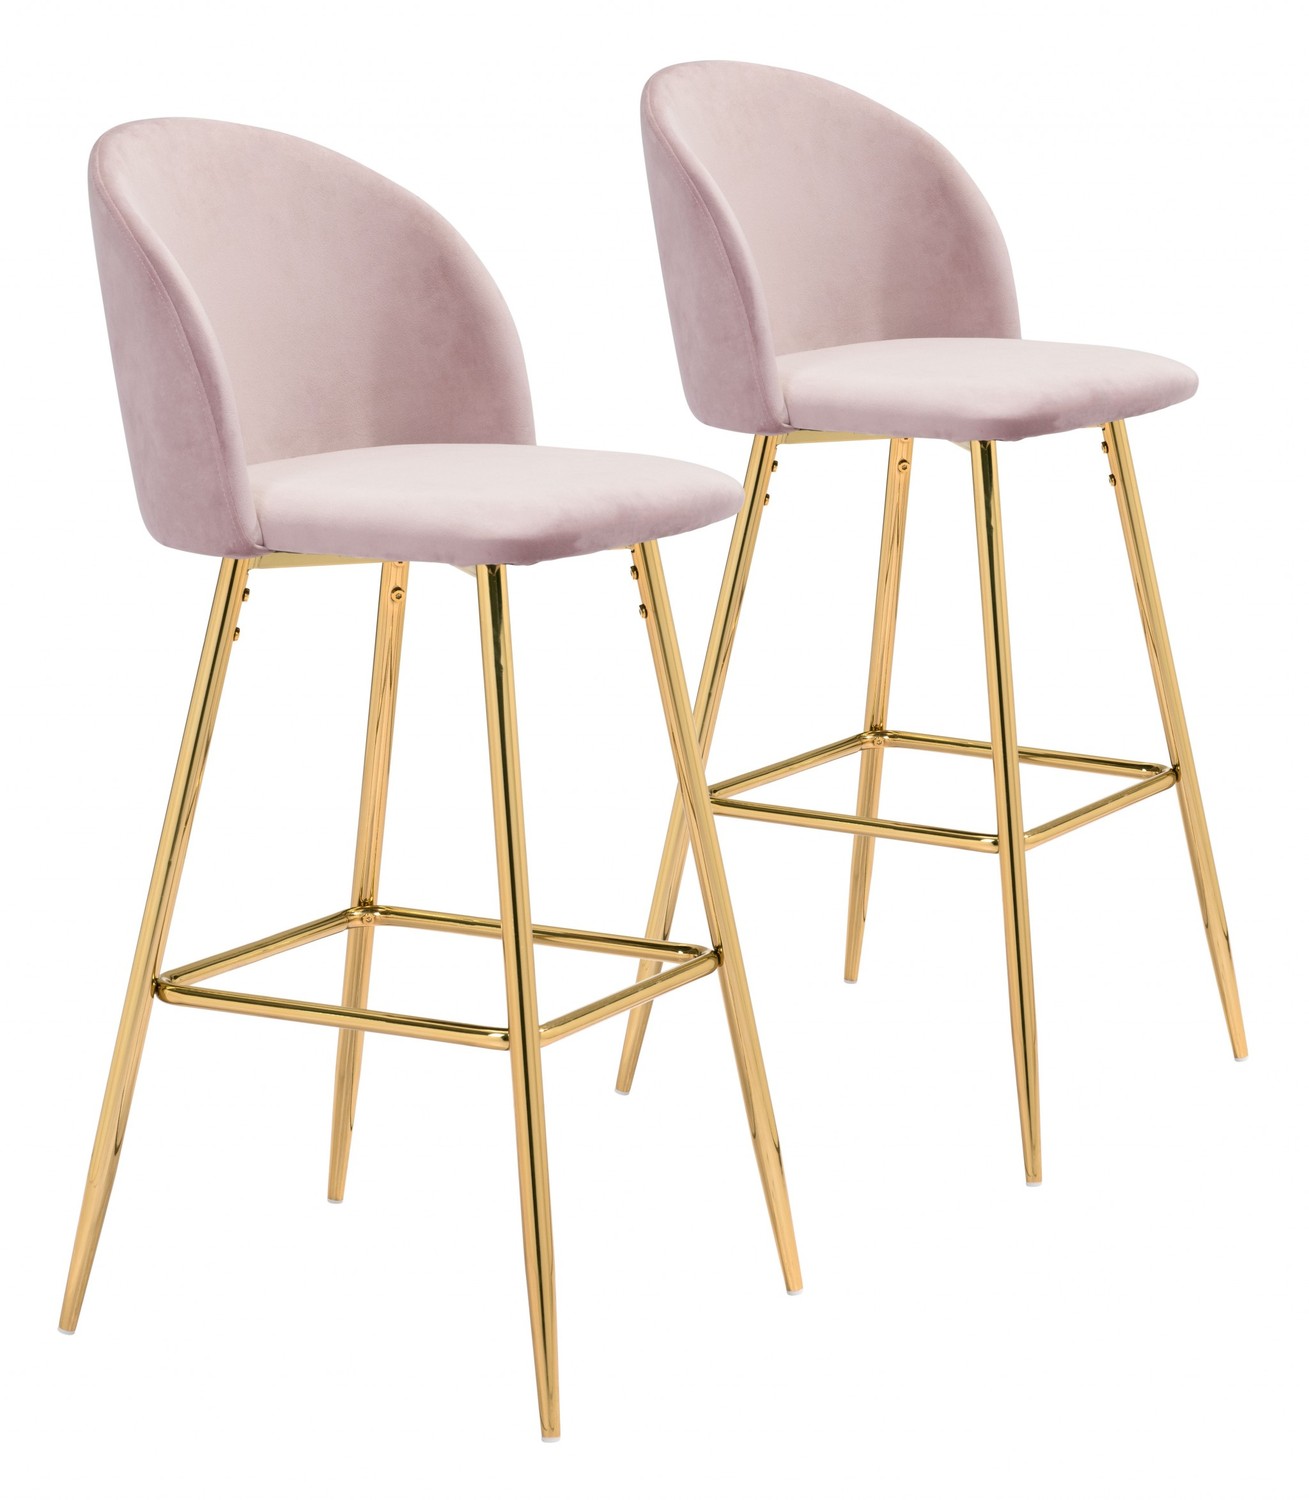 Pale Pink and Gold Modern Pringle Bar Chair